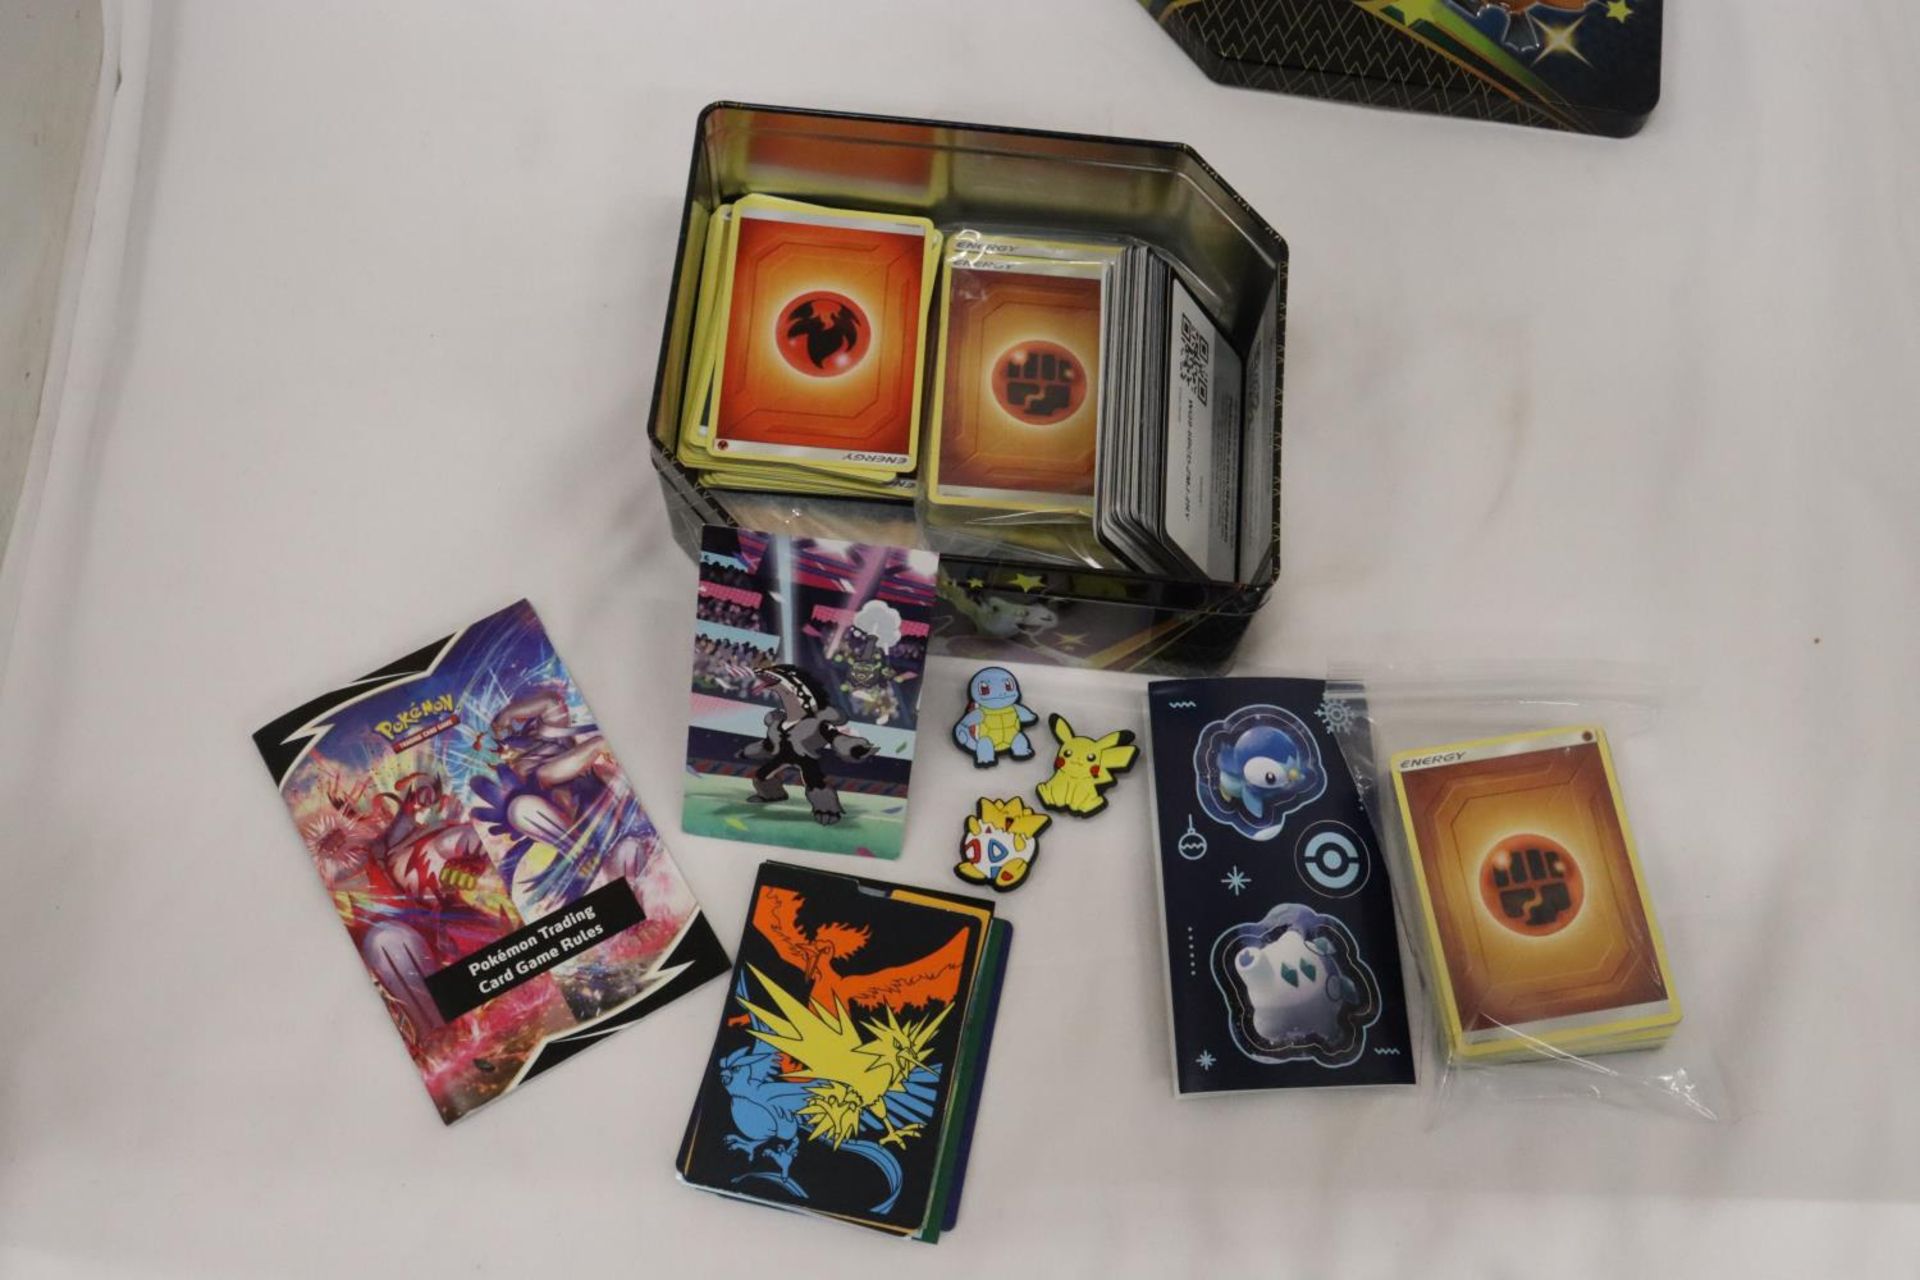 A POKEMON COLLECTORS TIN FULL OF CARDS, DIVIDERS AND EXTRAS - Image 2 of 6